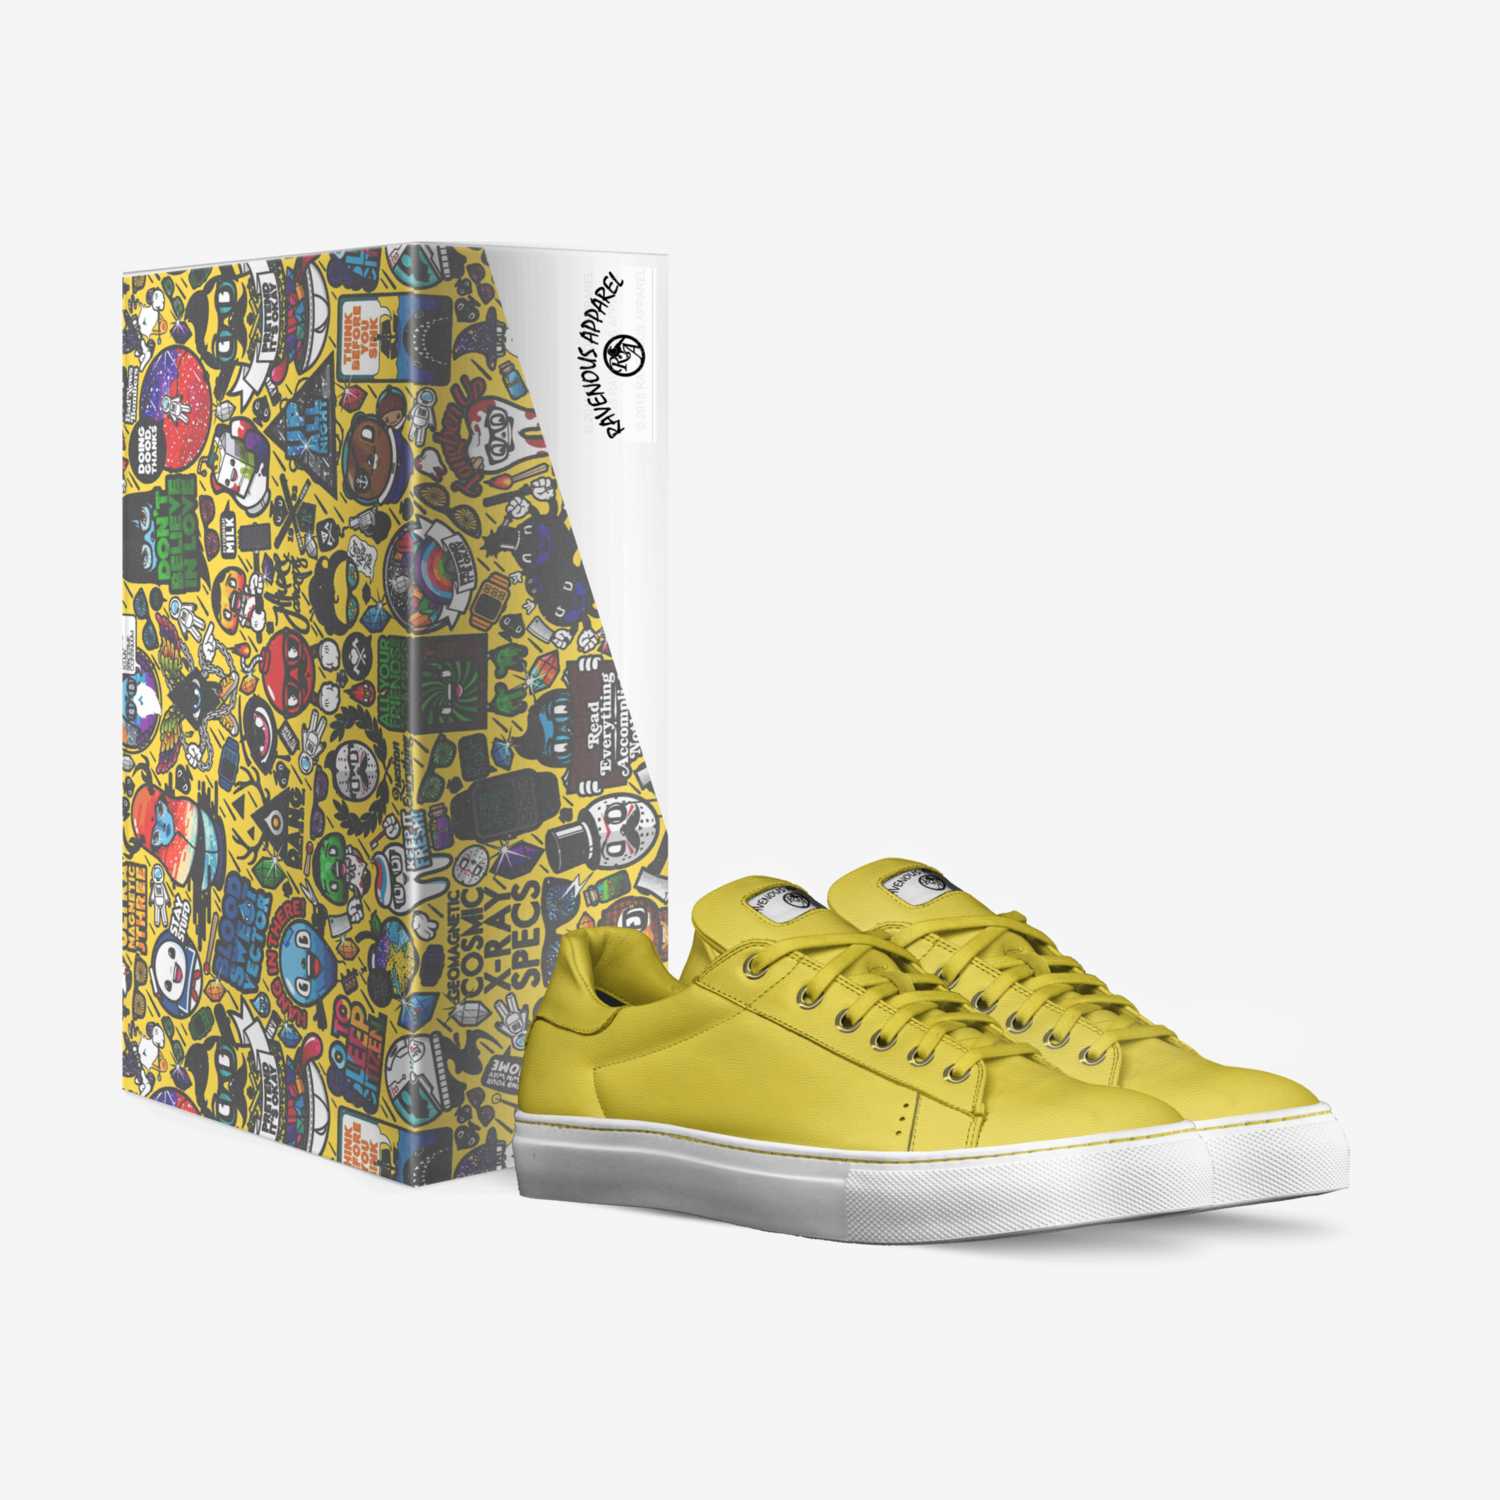 RA Yellows custom made in Italy shoes by Thomas Rodriguez | Box view